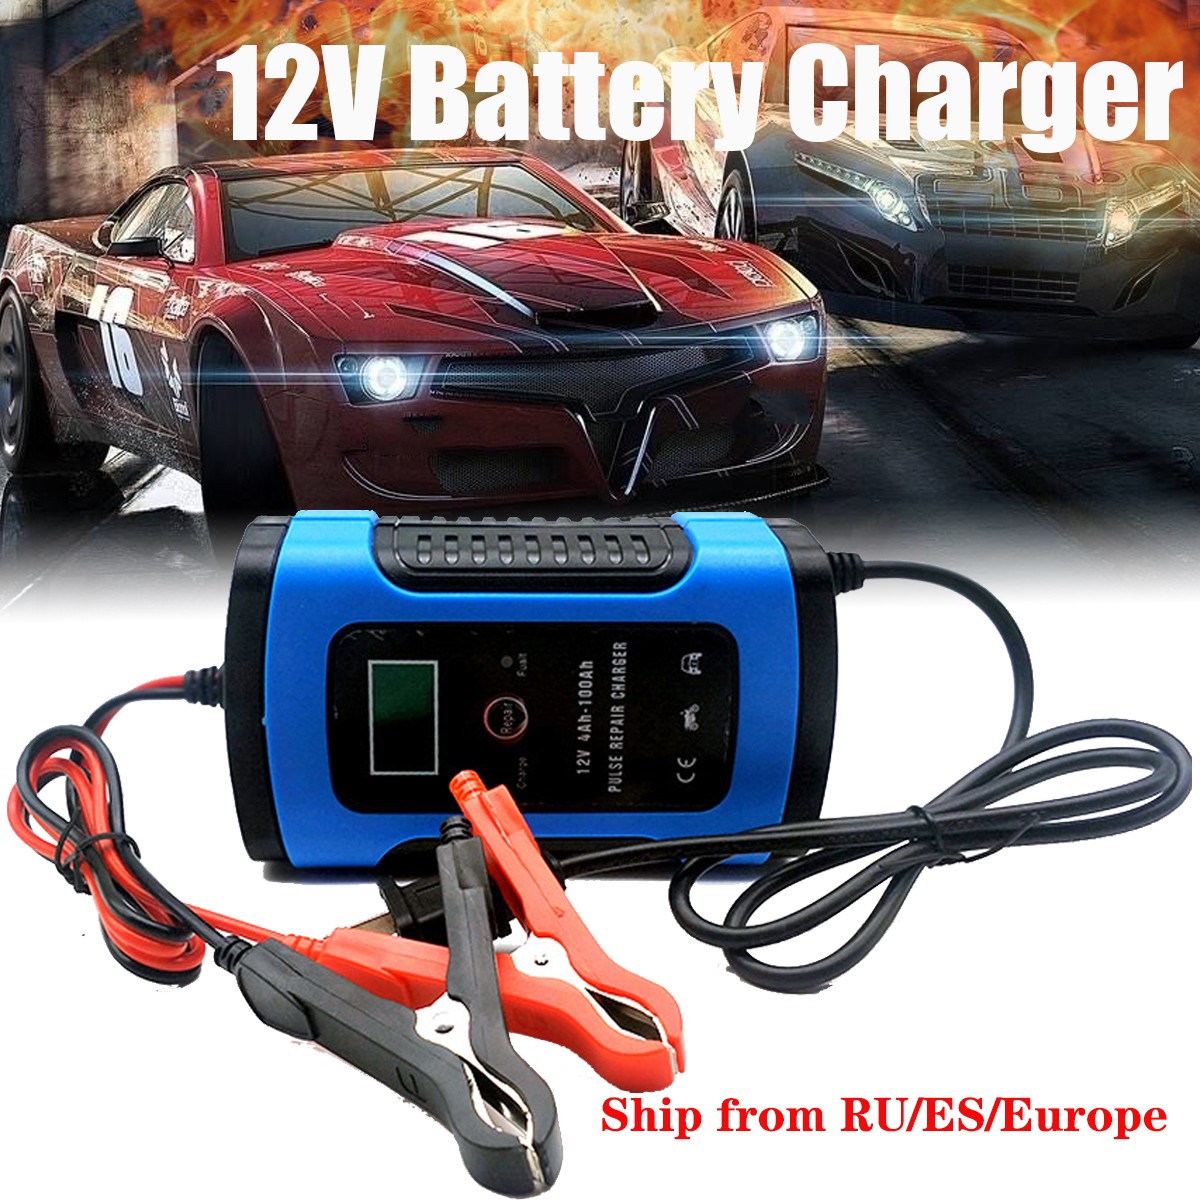 12V 6A Auto Fast Lead-Acid GEL LED Battery Charger Maintainer Car Motorcycle AGM